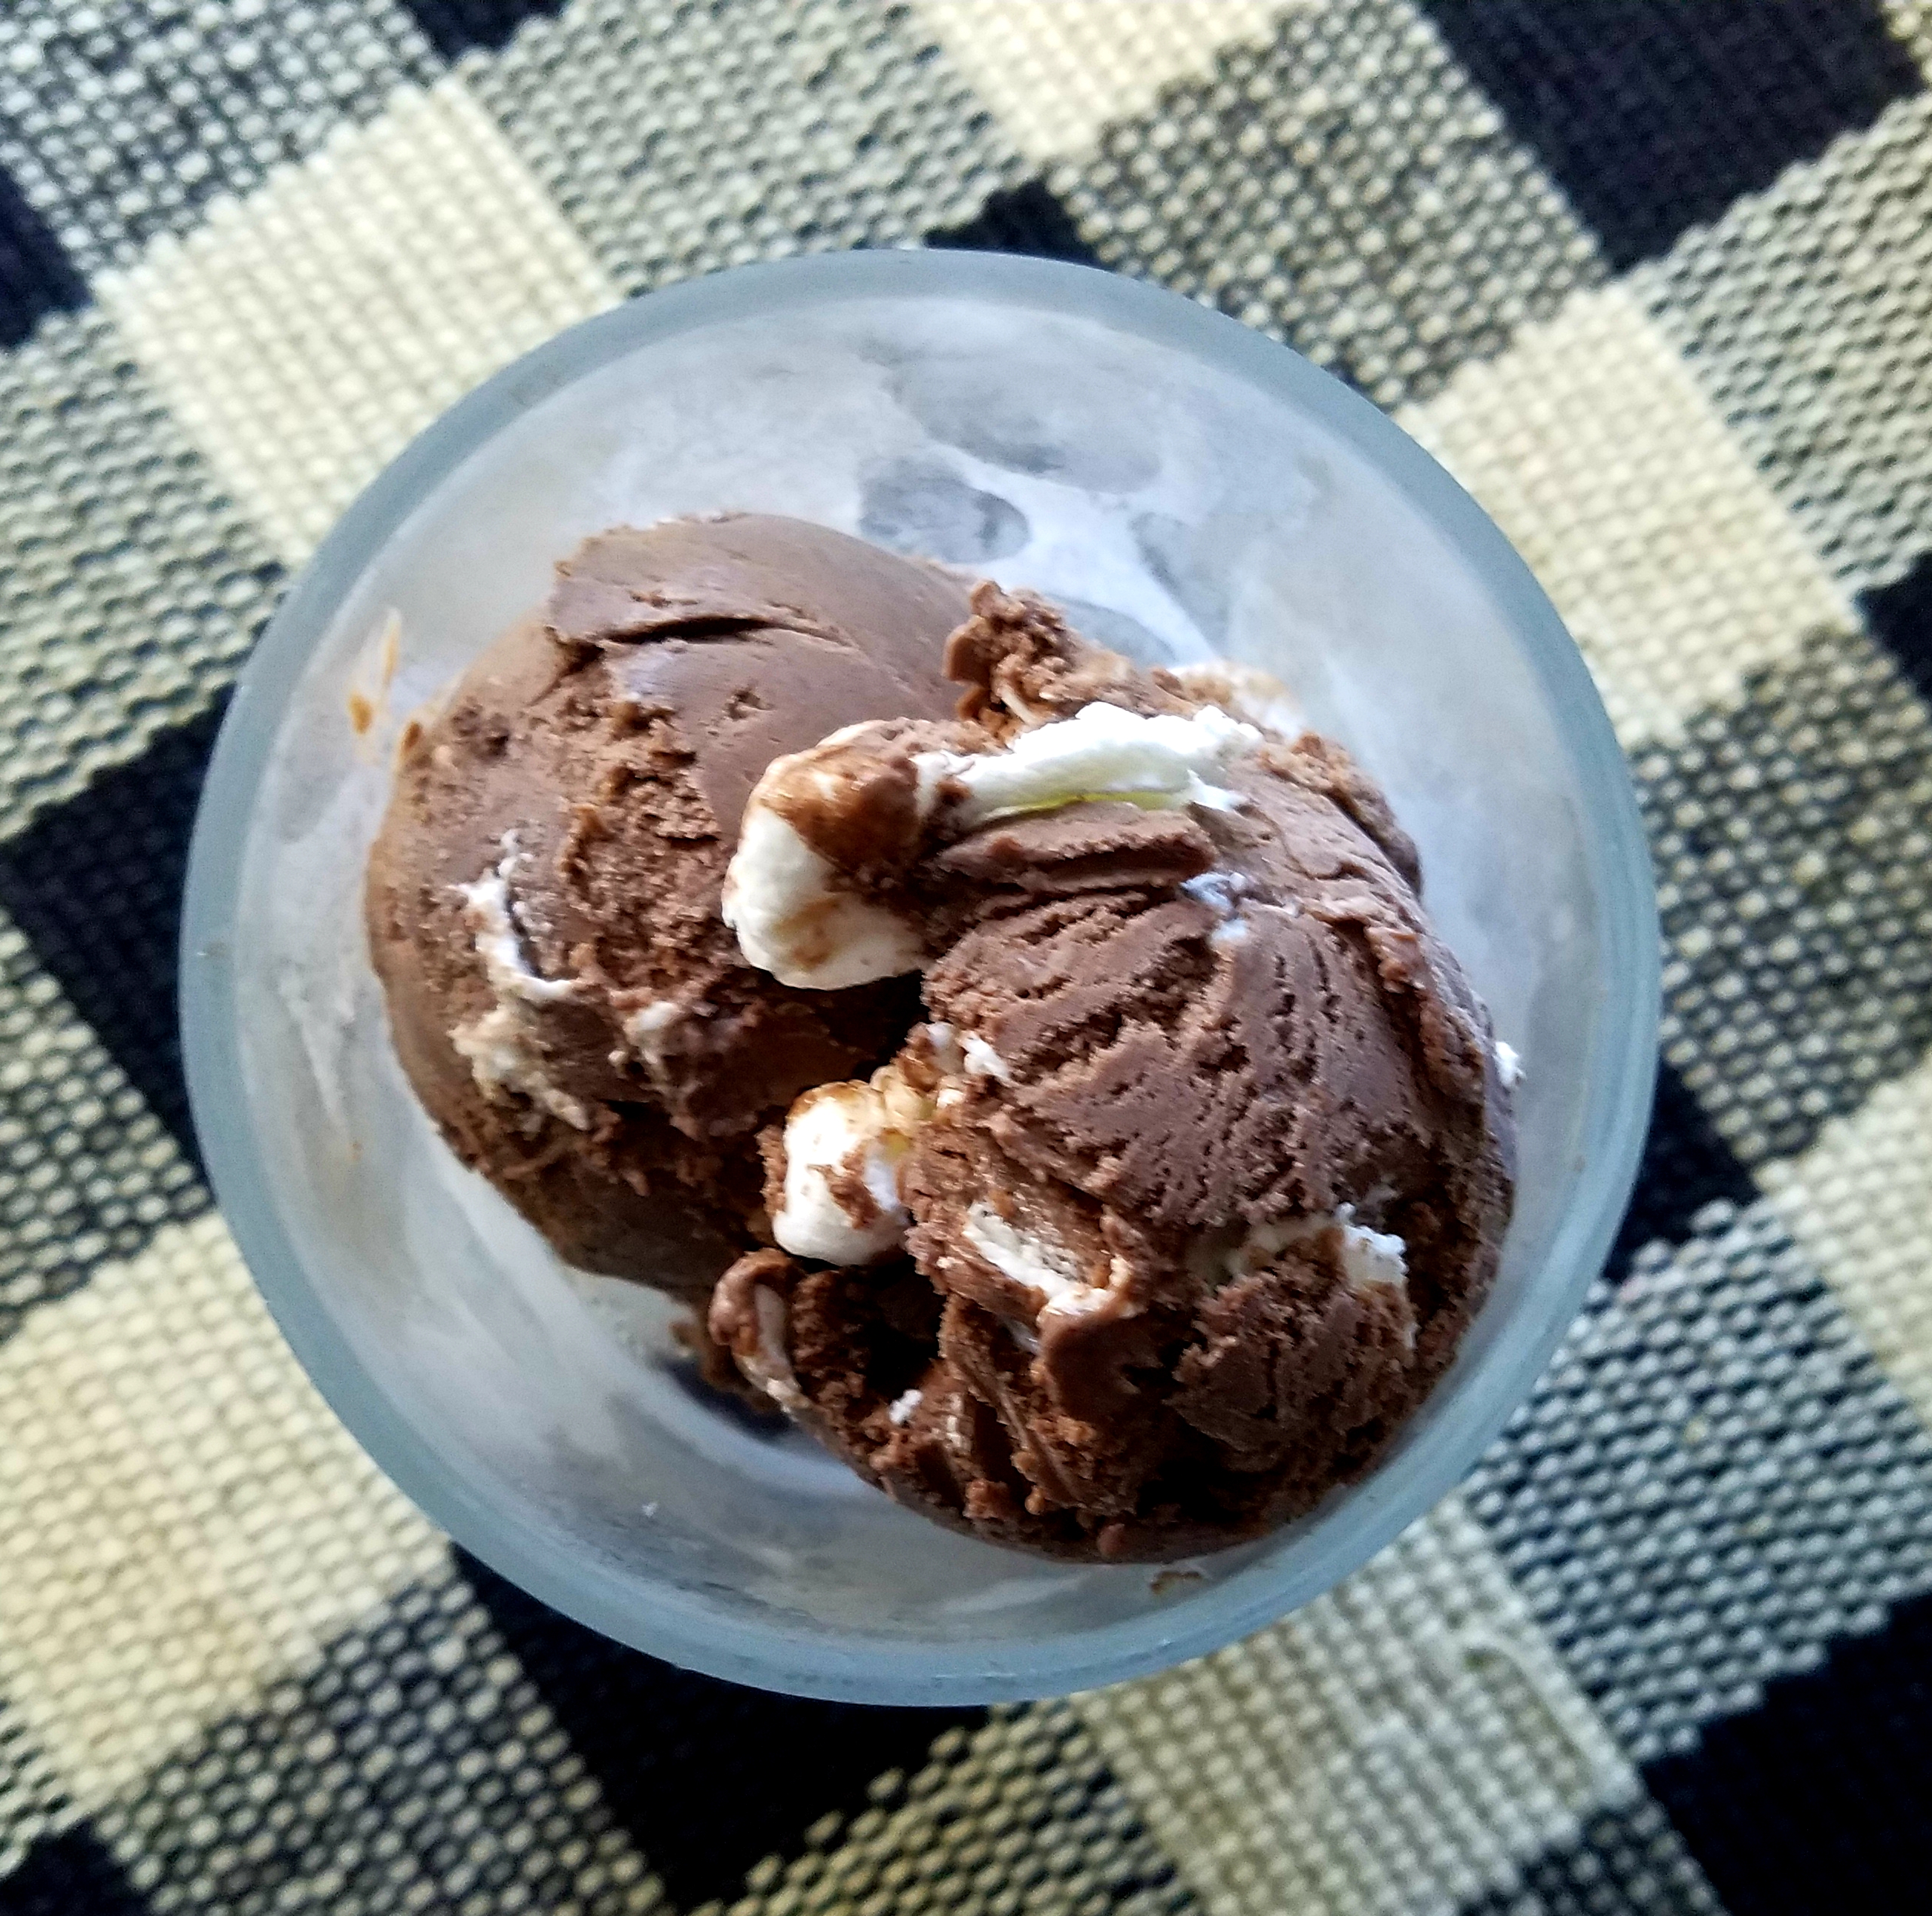 Cinnamon Hot Chocolate Ice Cream (Recipe Inspired by THE CABIN AT THE END OF THE WORLD)